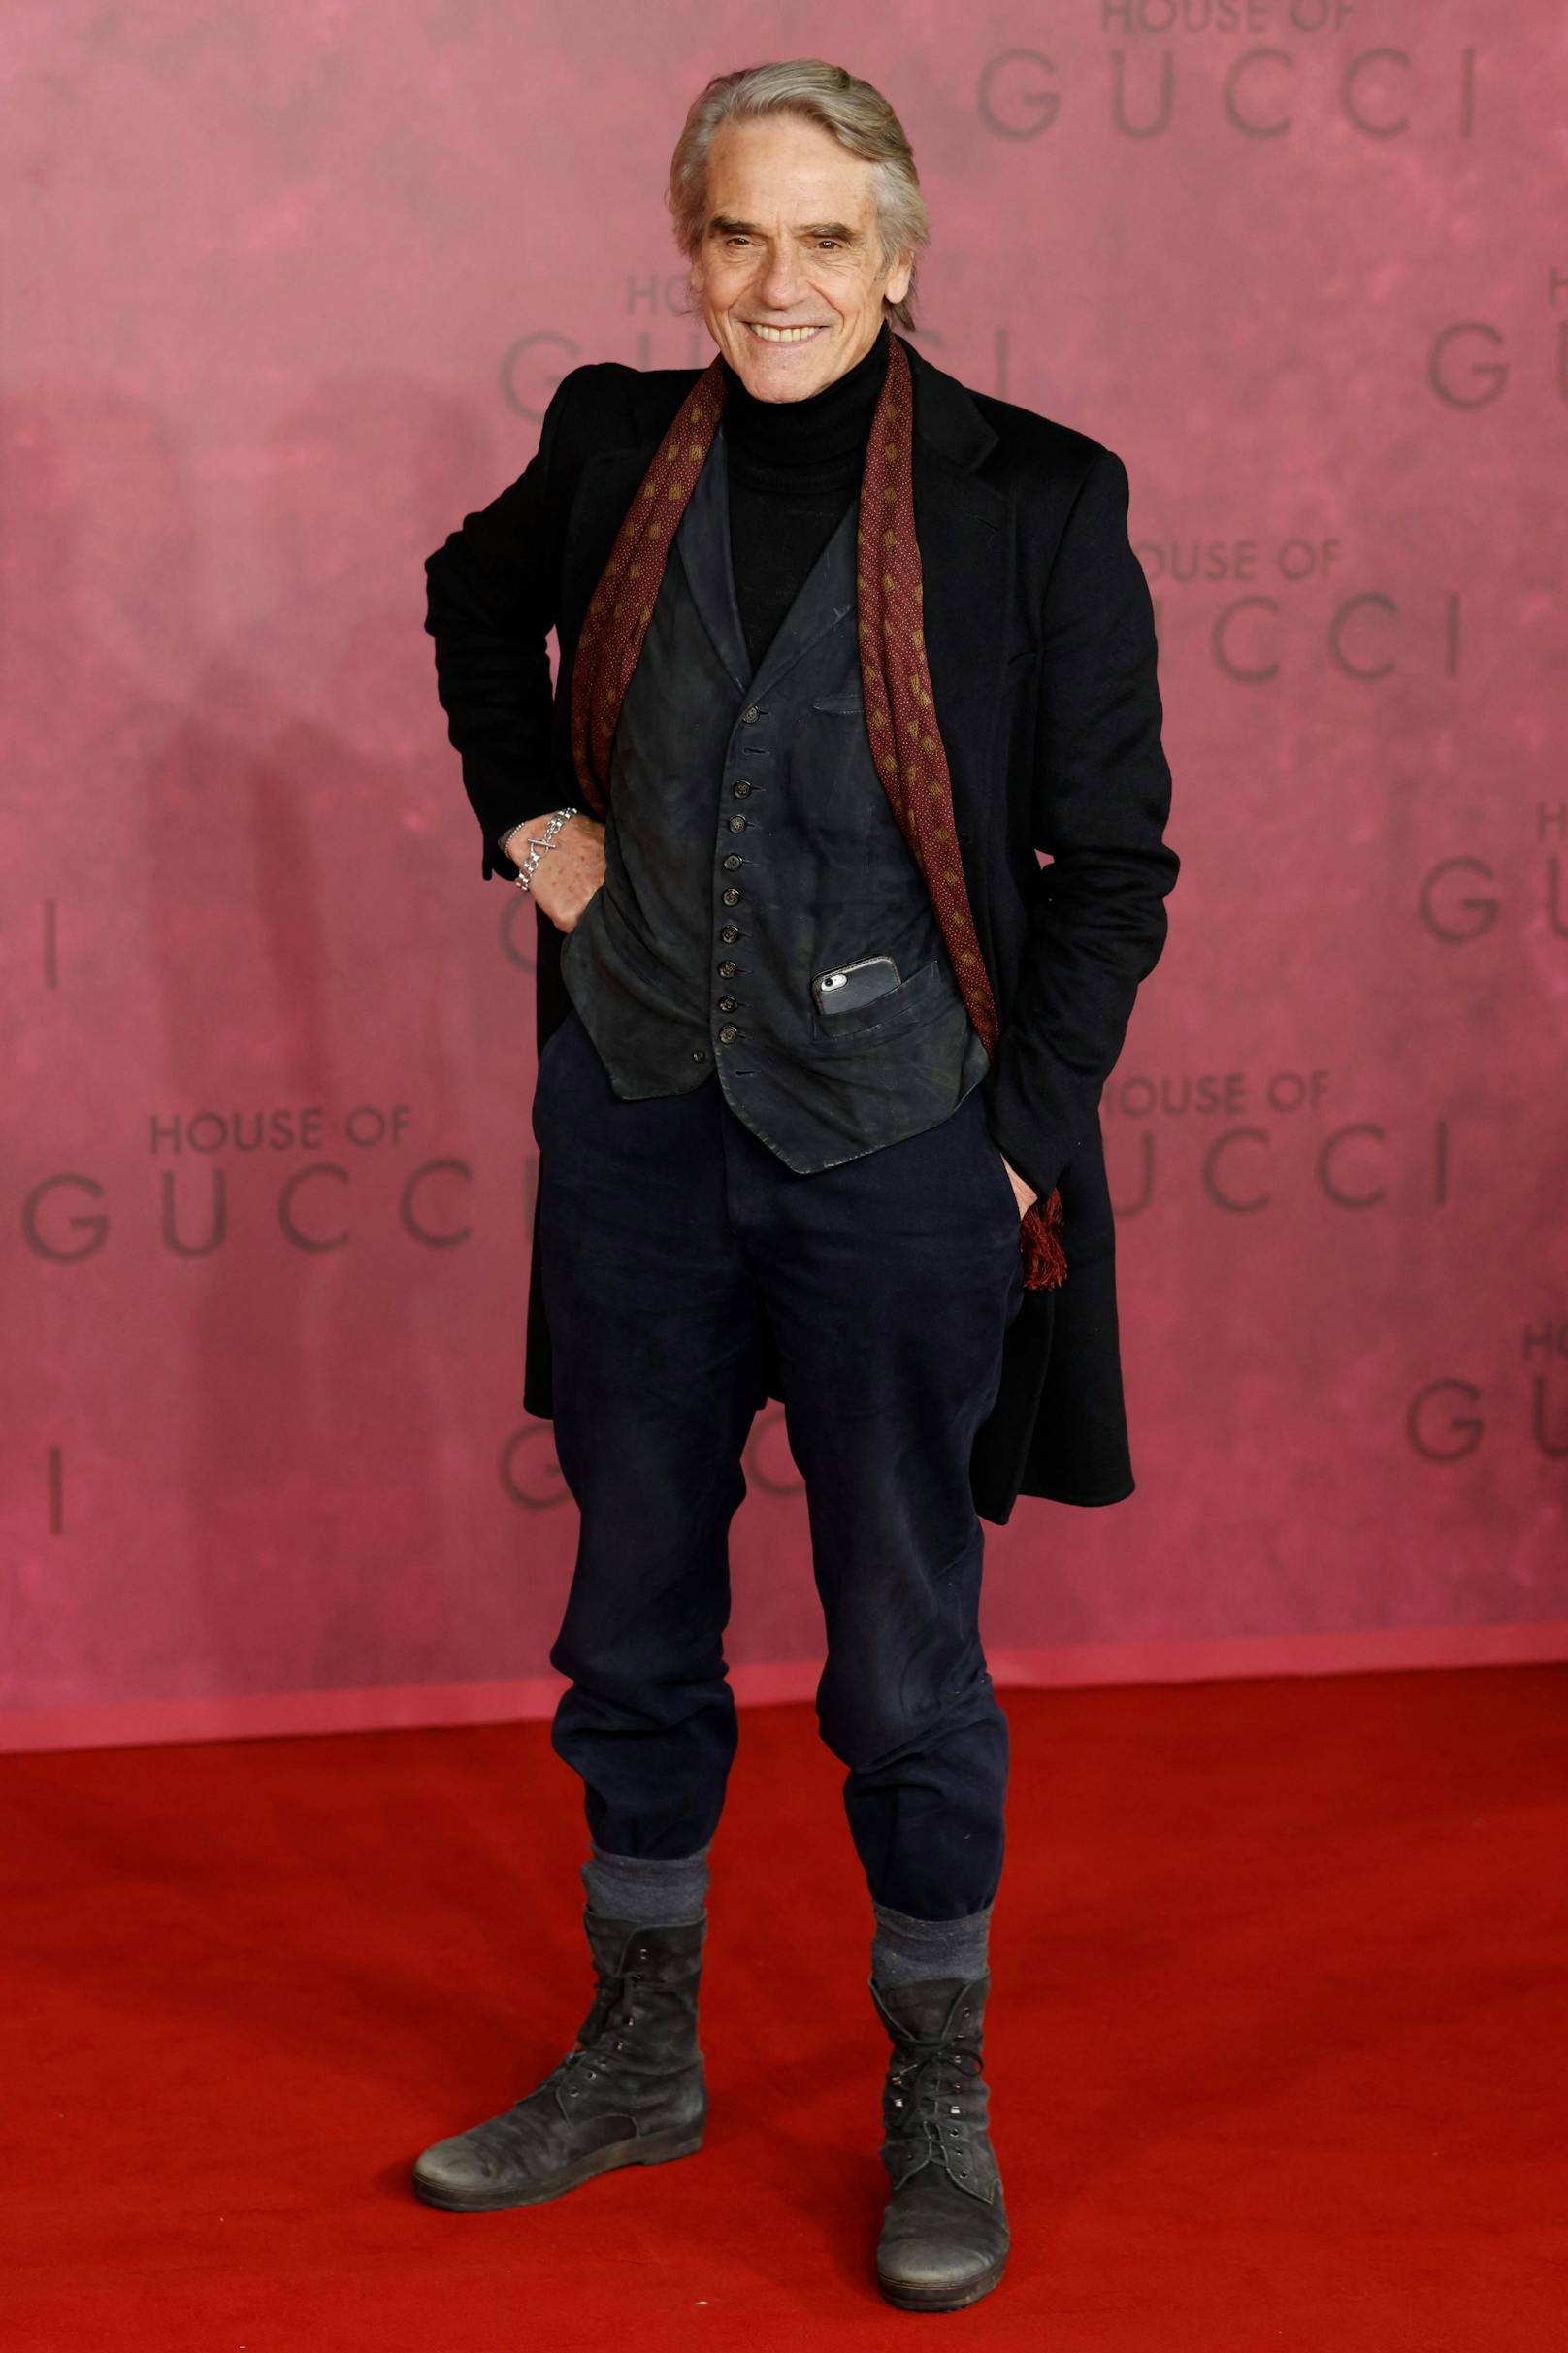 <strong>Jeremy Irons</strong> spielt Rodolfo Gucci.